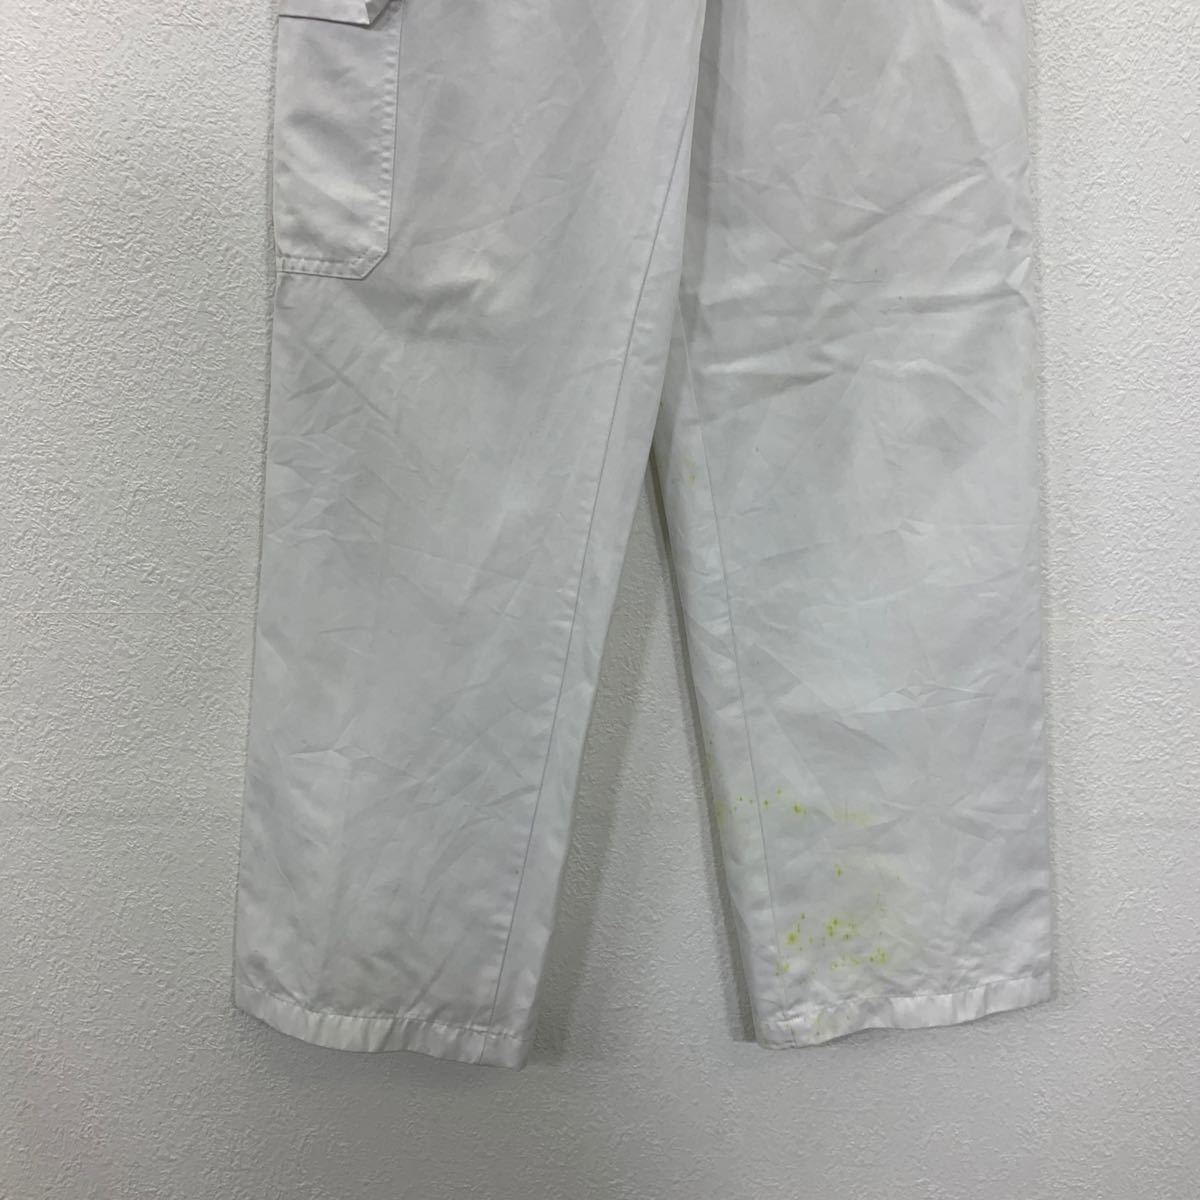 boco work pants W22 white XS size lady's old clothes . America buying up 2311-776